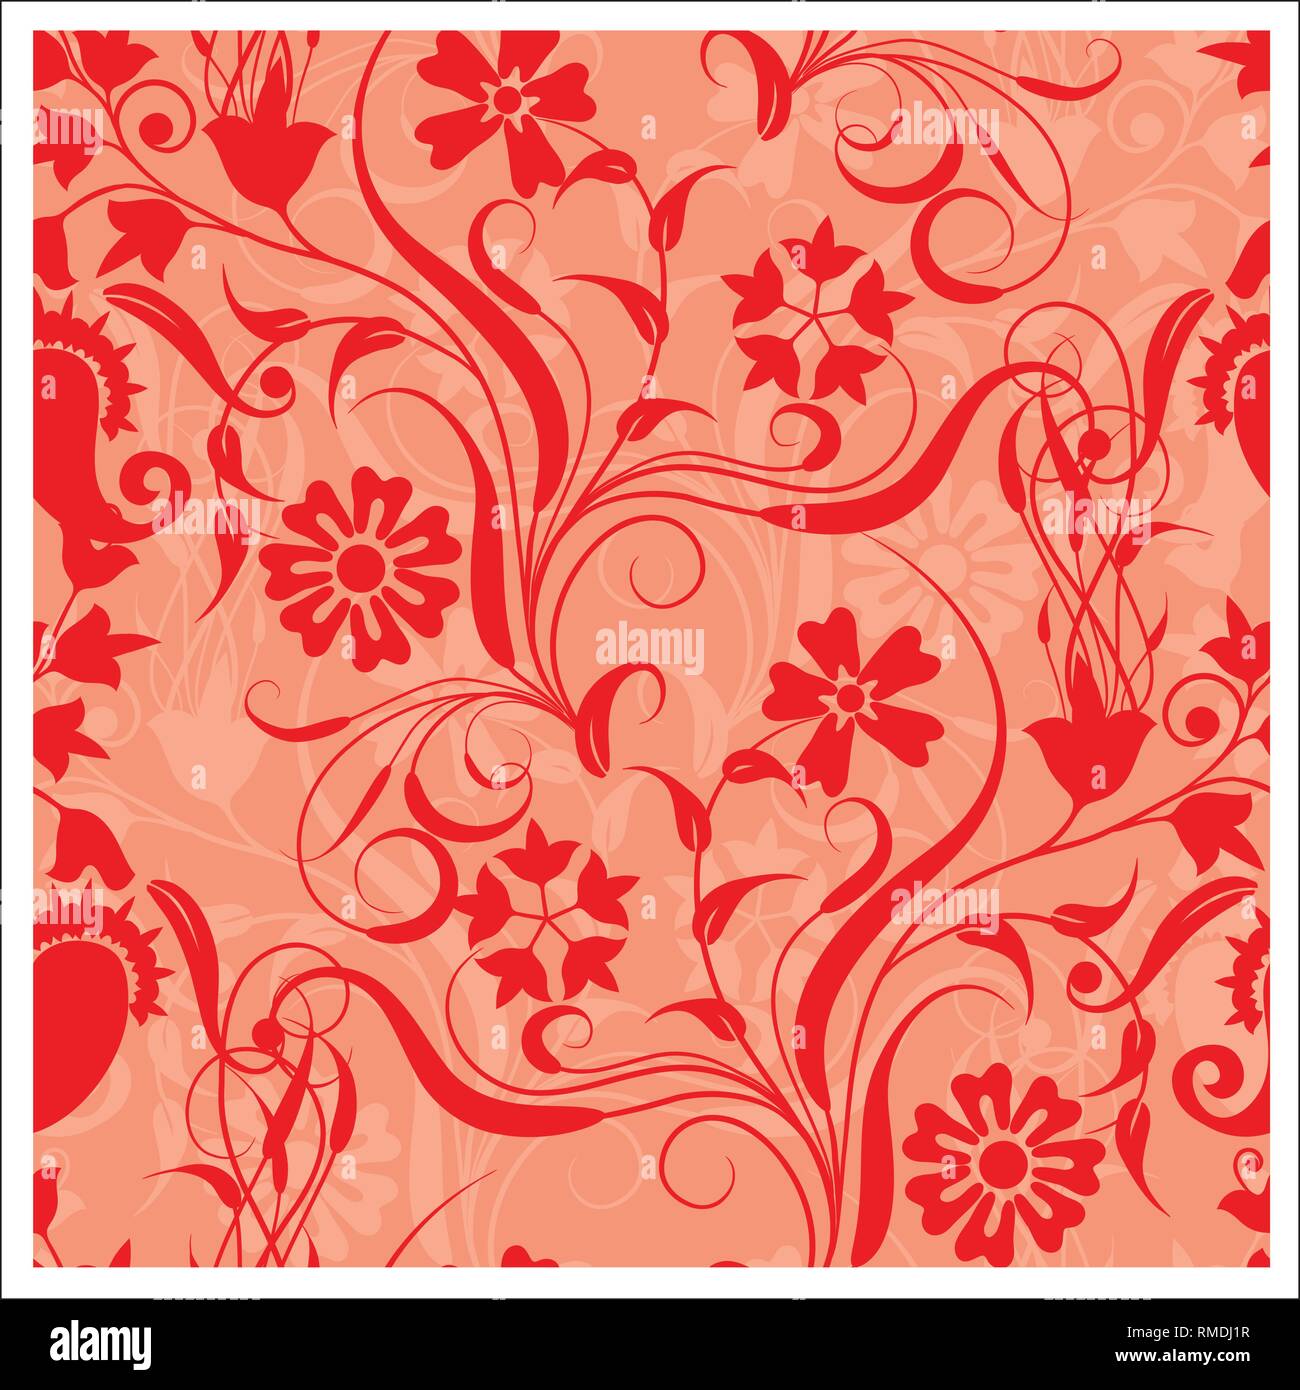 Batik Design Style Patterns Are The Same For Fabric Design